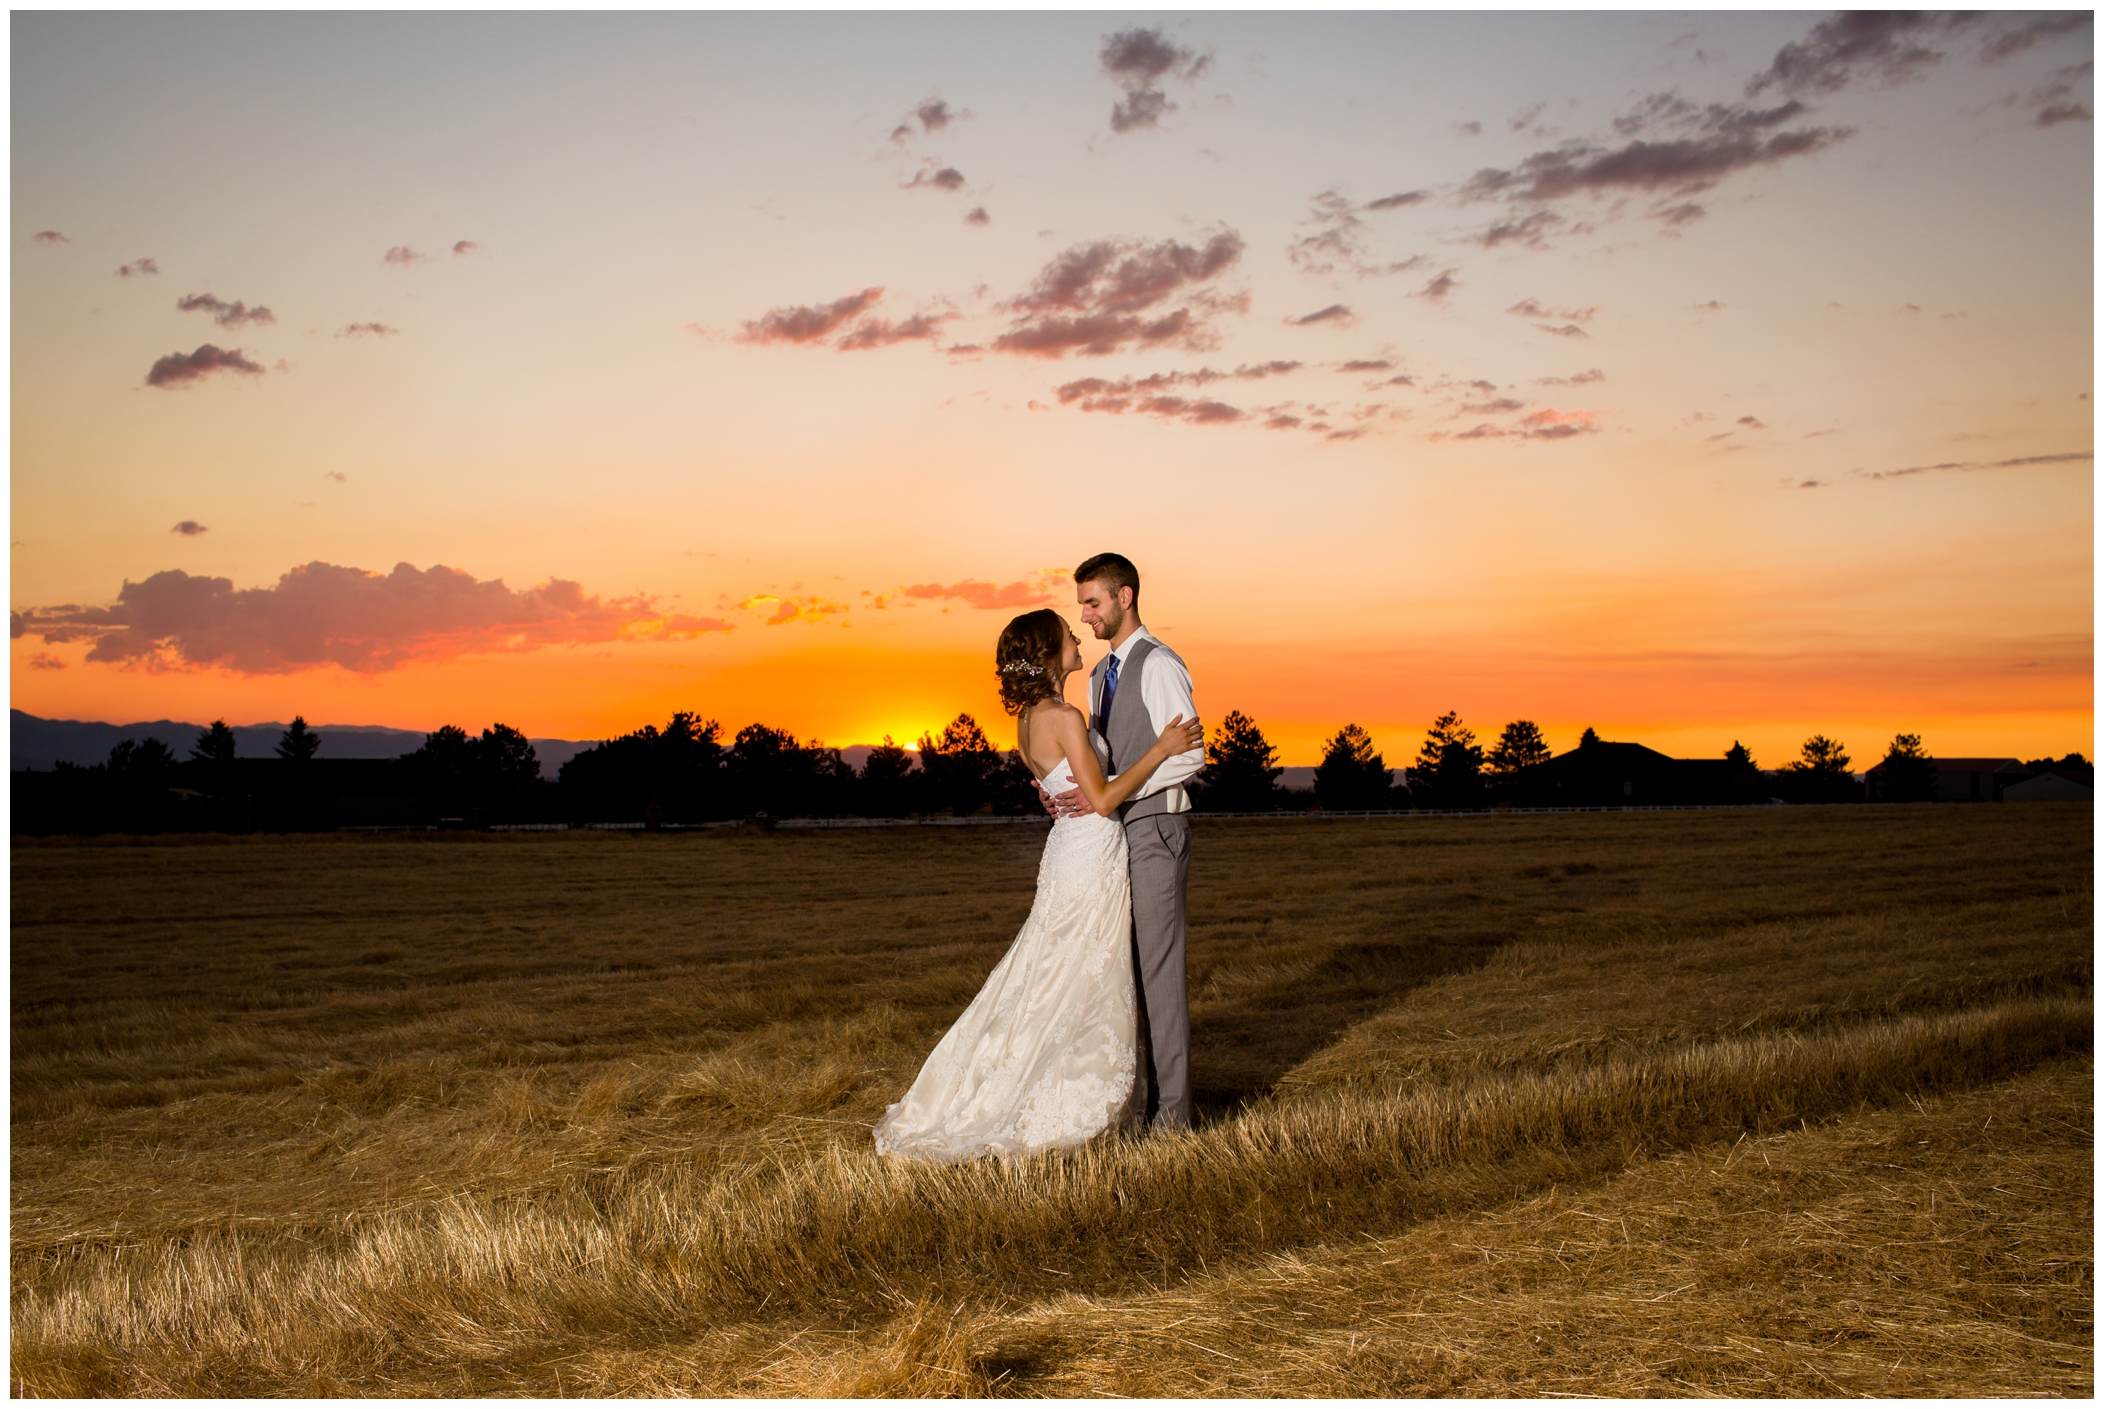 Windsong Estate wedding photos by Ft. Collins photographer Plum Pretty Photography